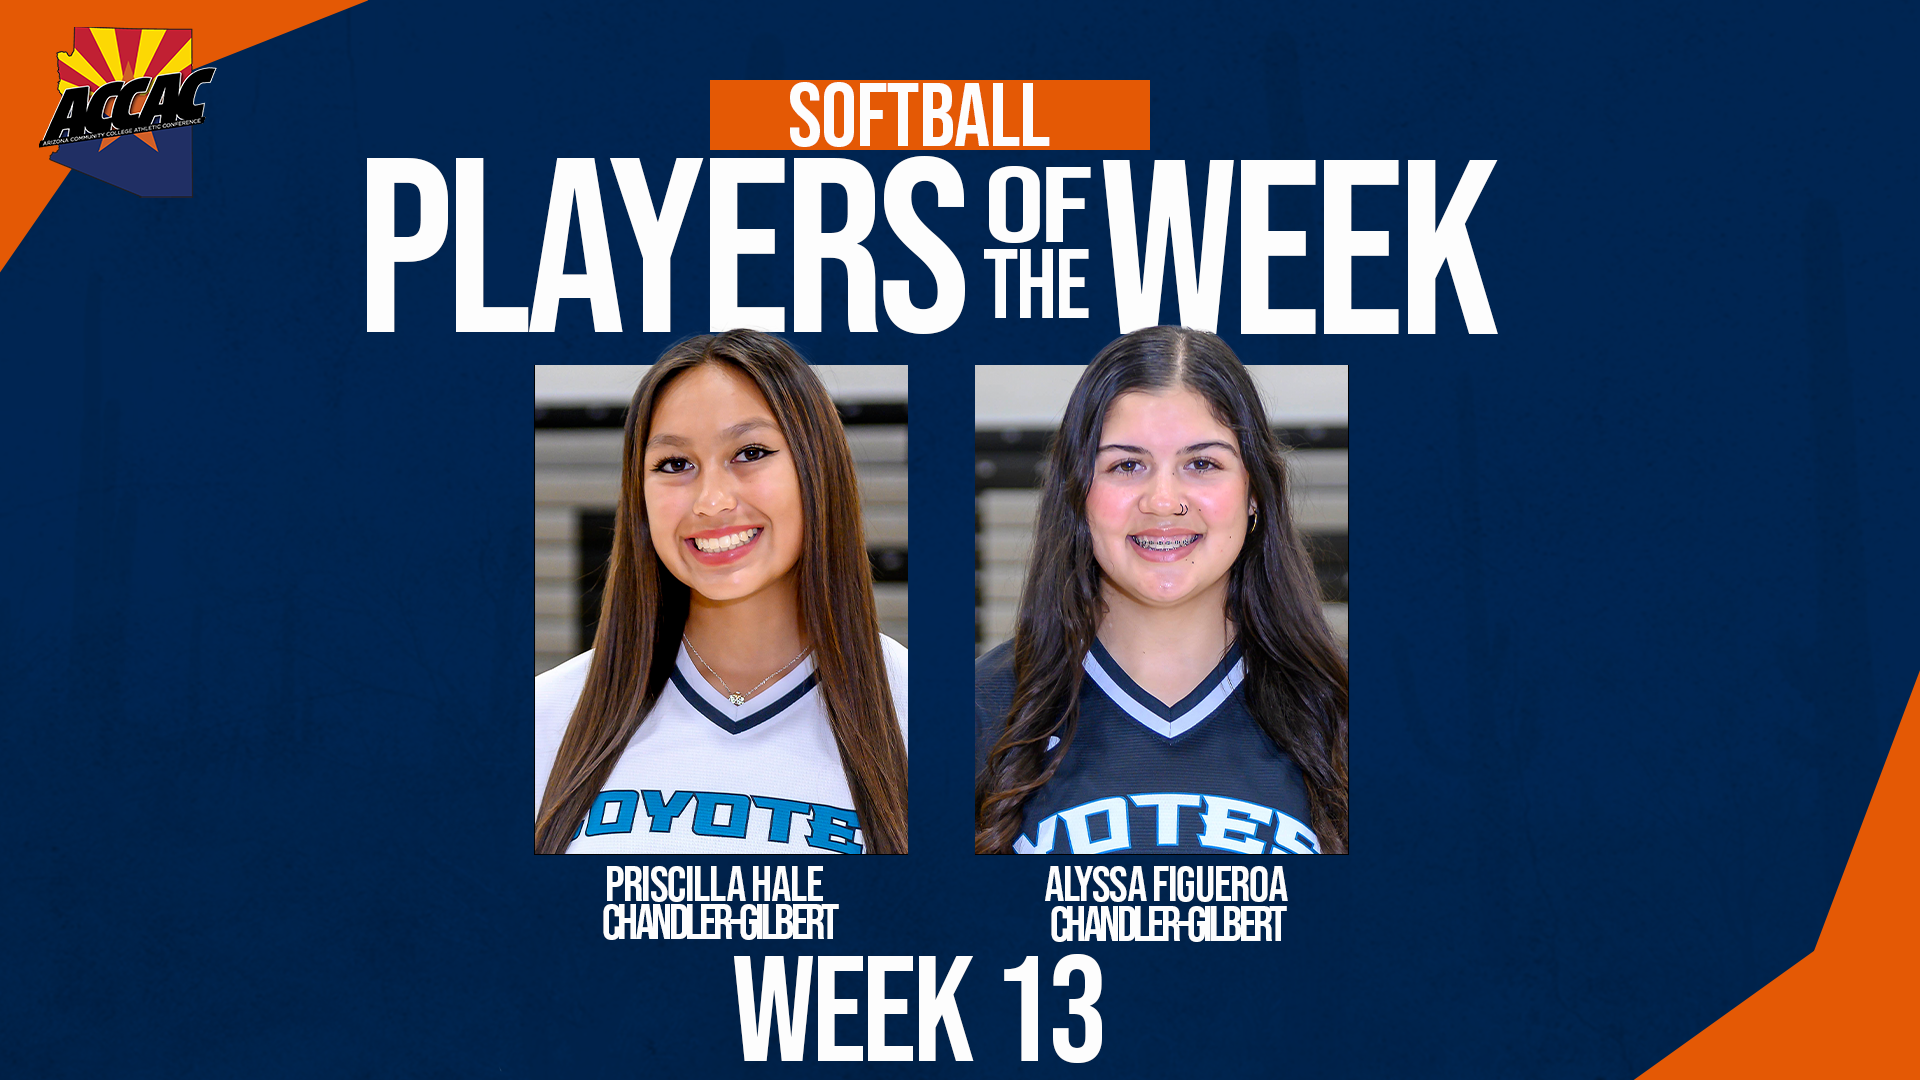 ACCAC Softball Players of the Week - Week 13